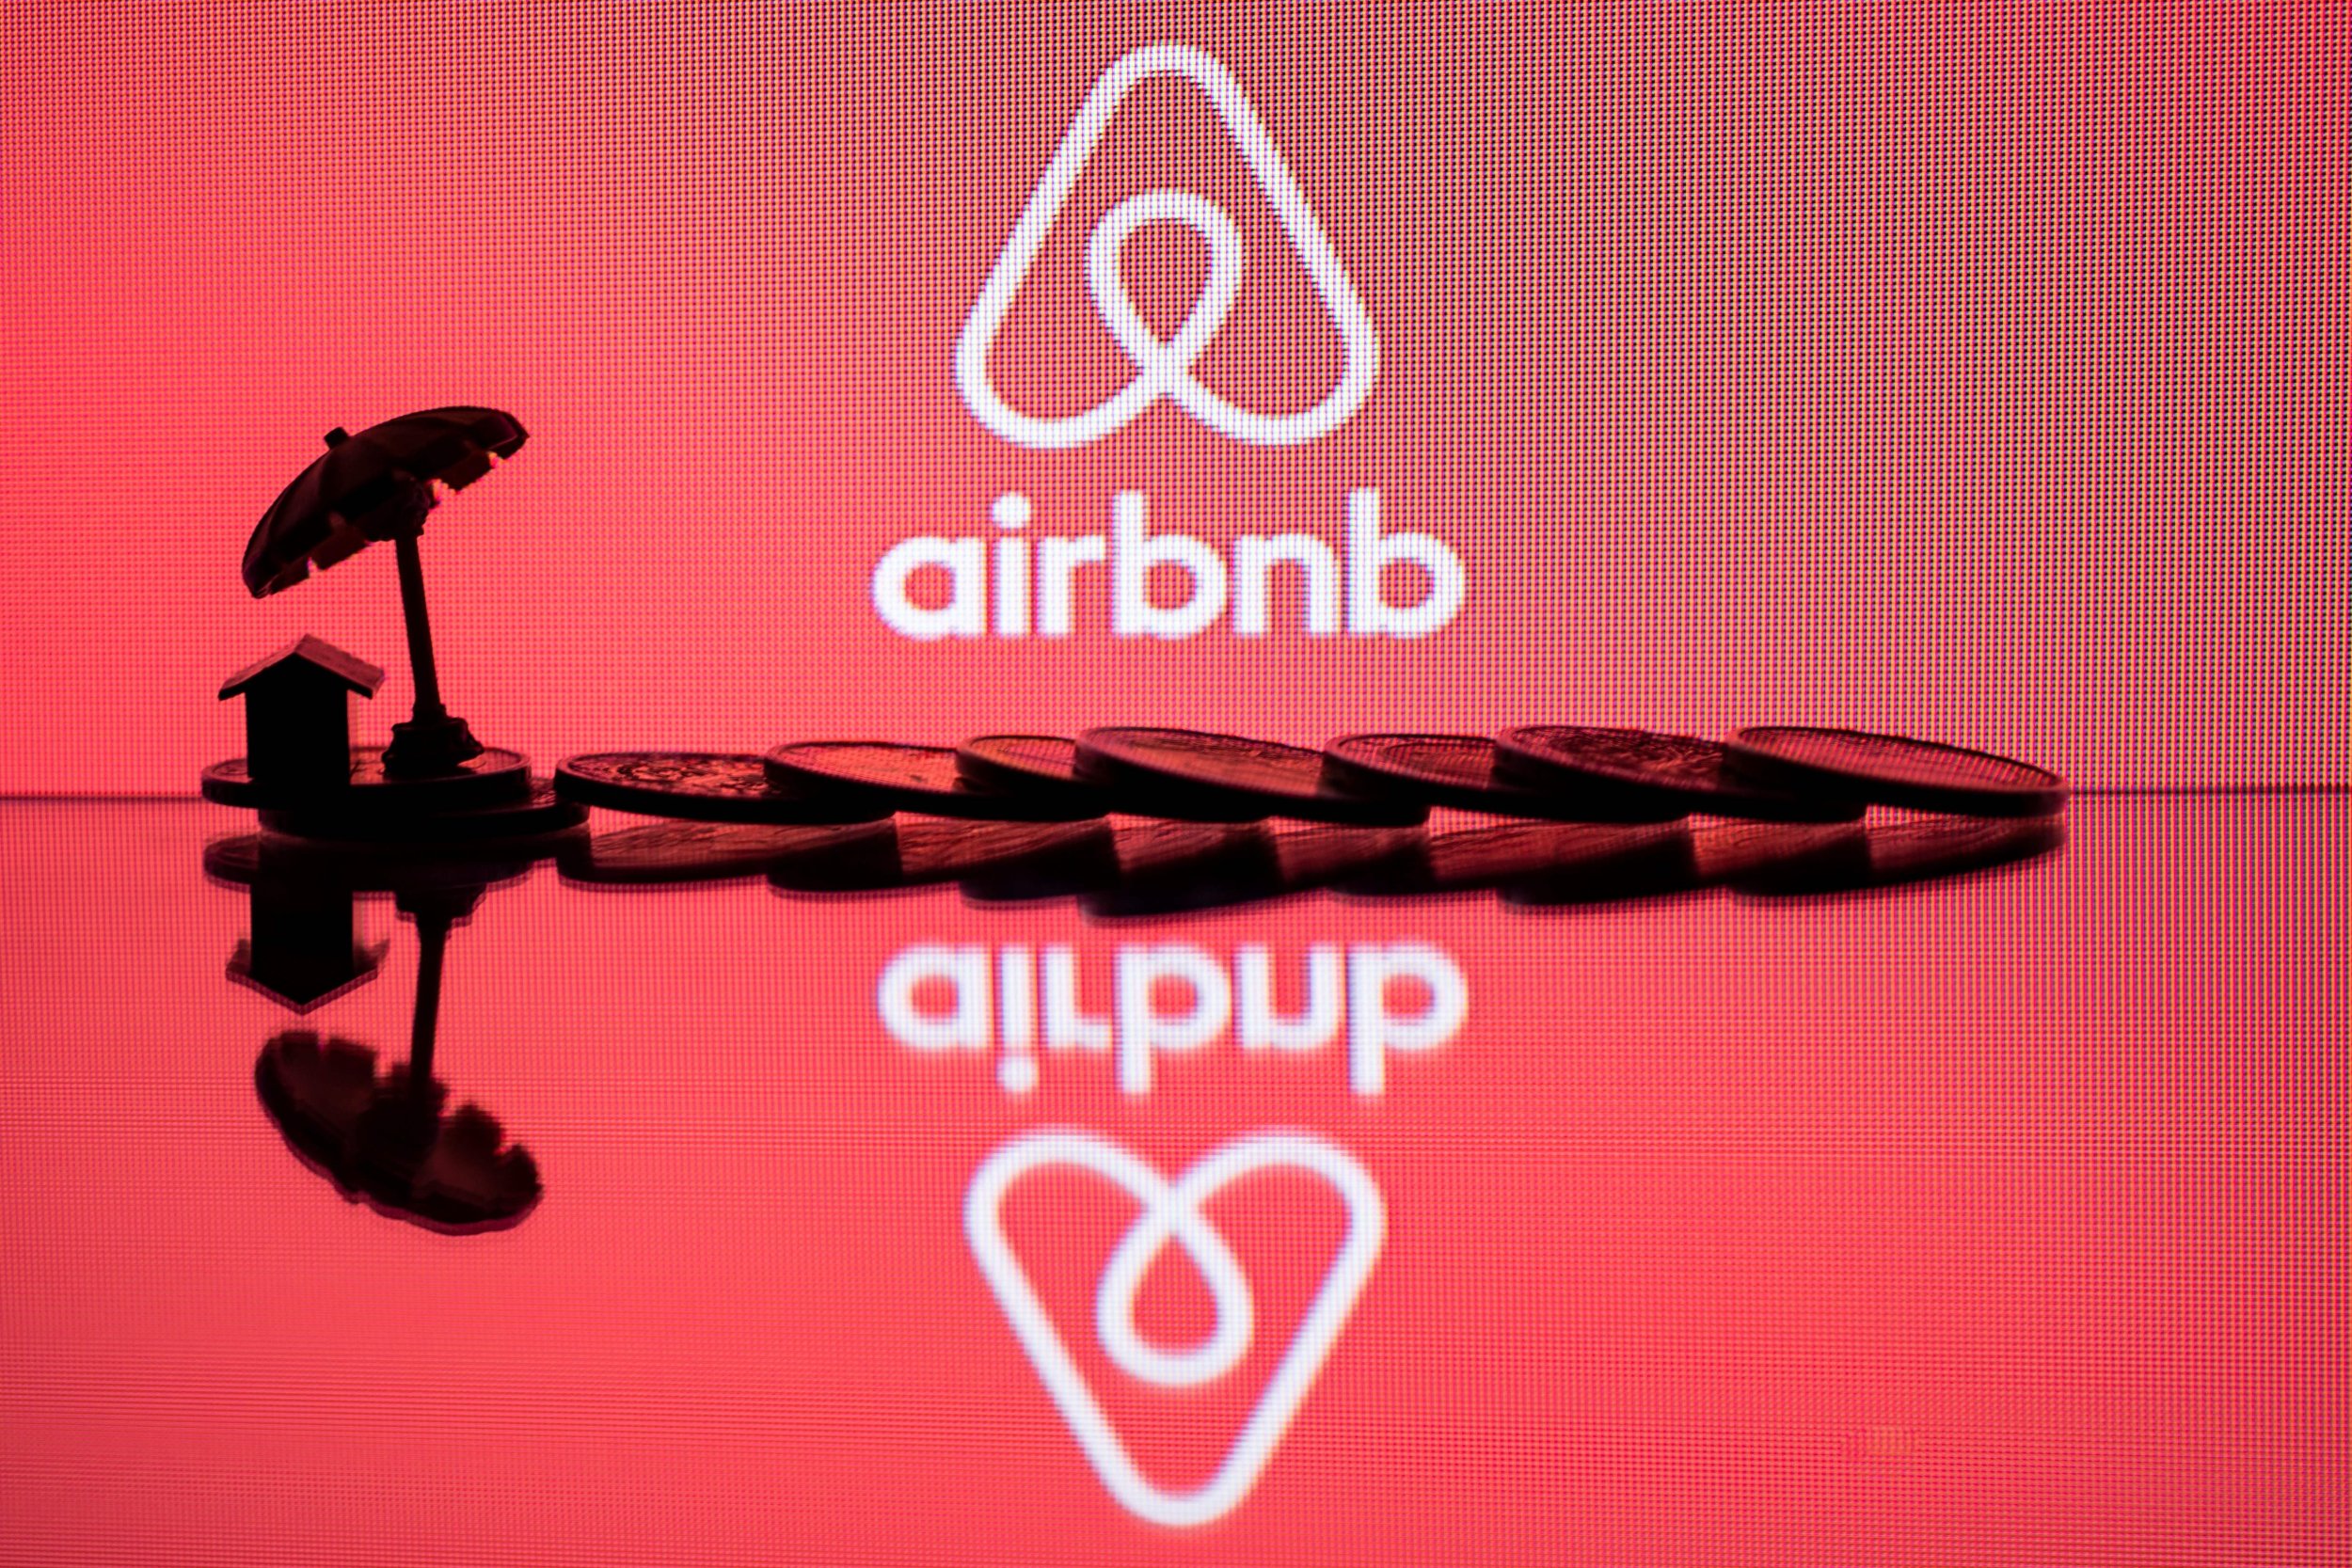 Paris Sues Airbnb For Illegal Ads, Could Pay 14.2M IBTimes